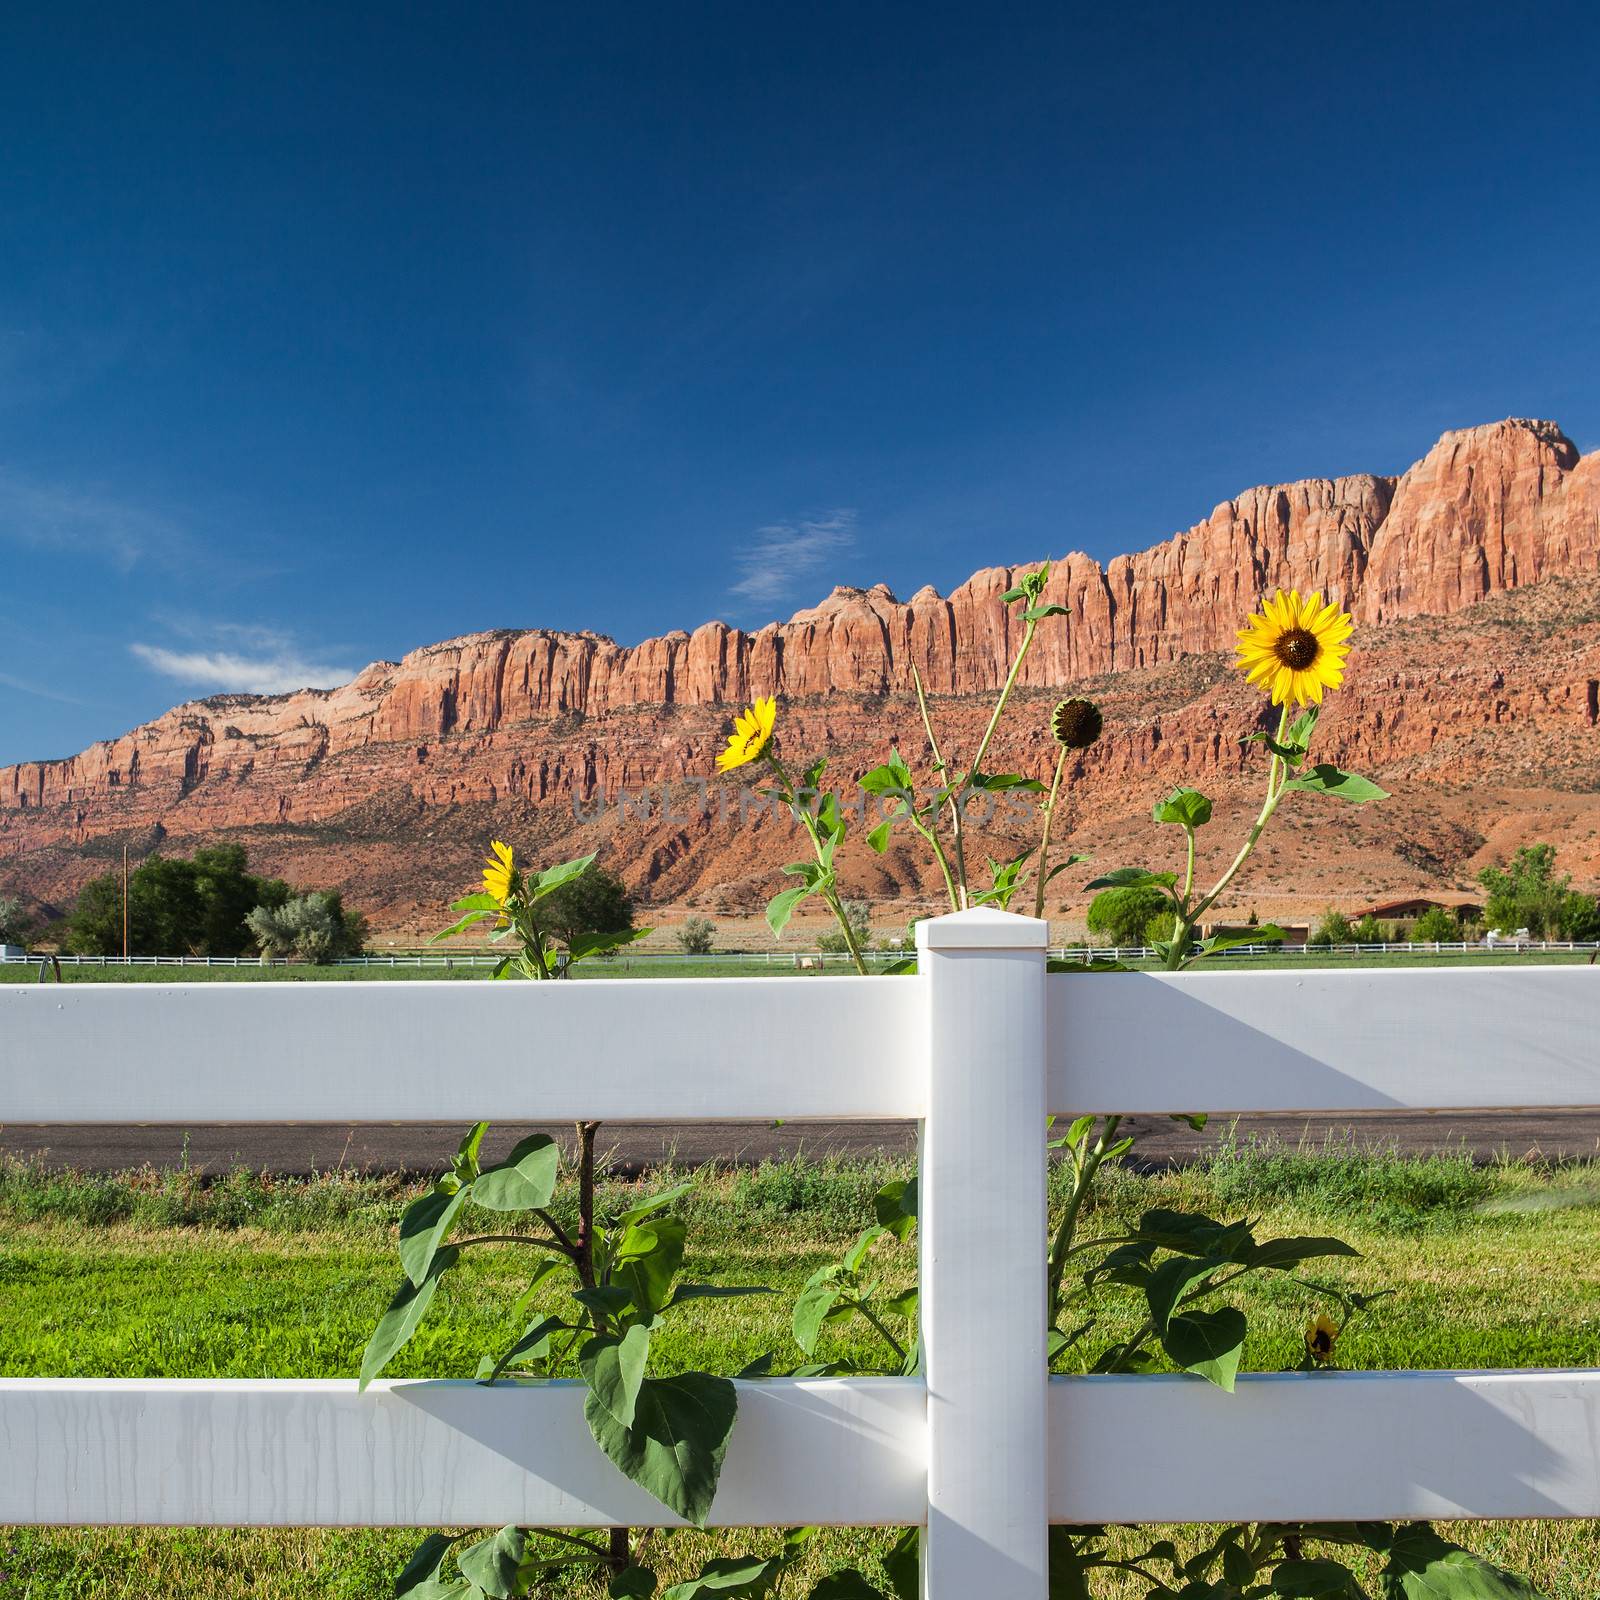 Sunflowers behind the fence by CaptureLight